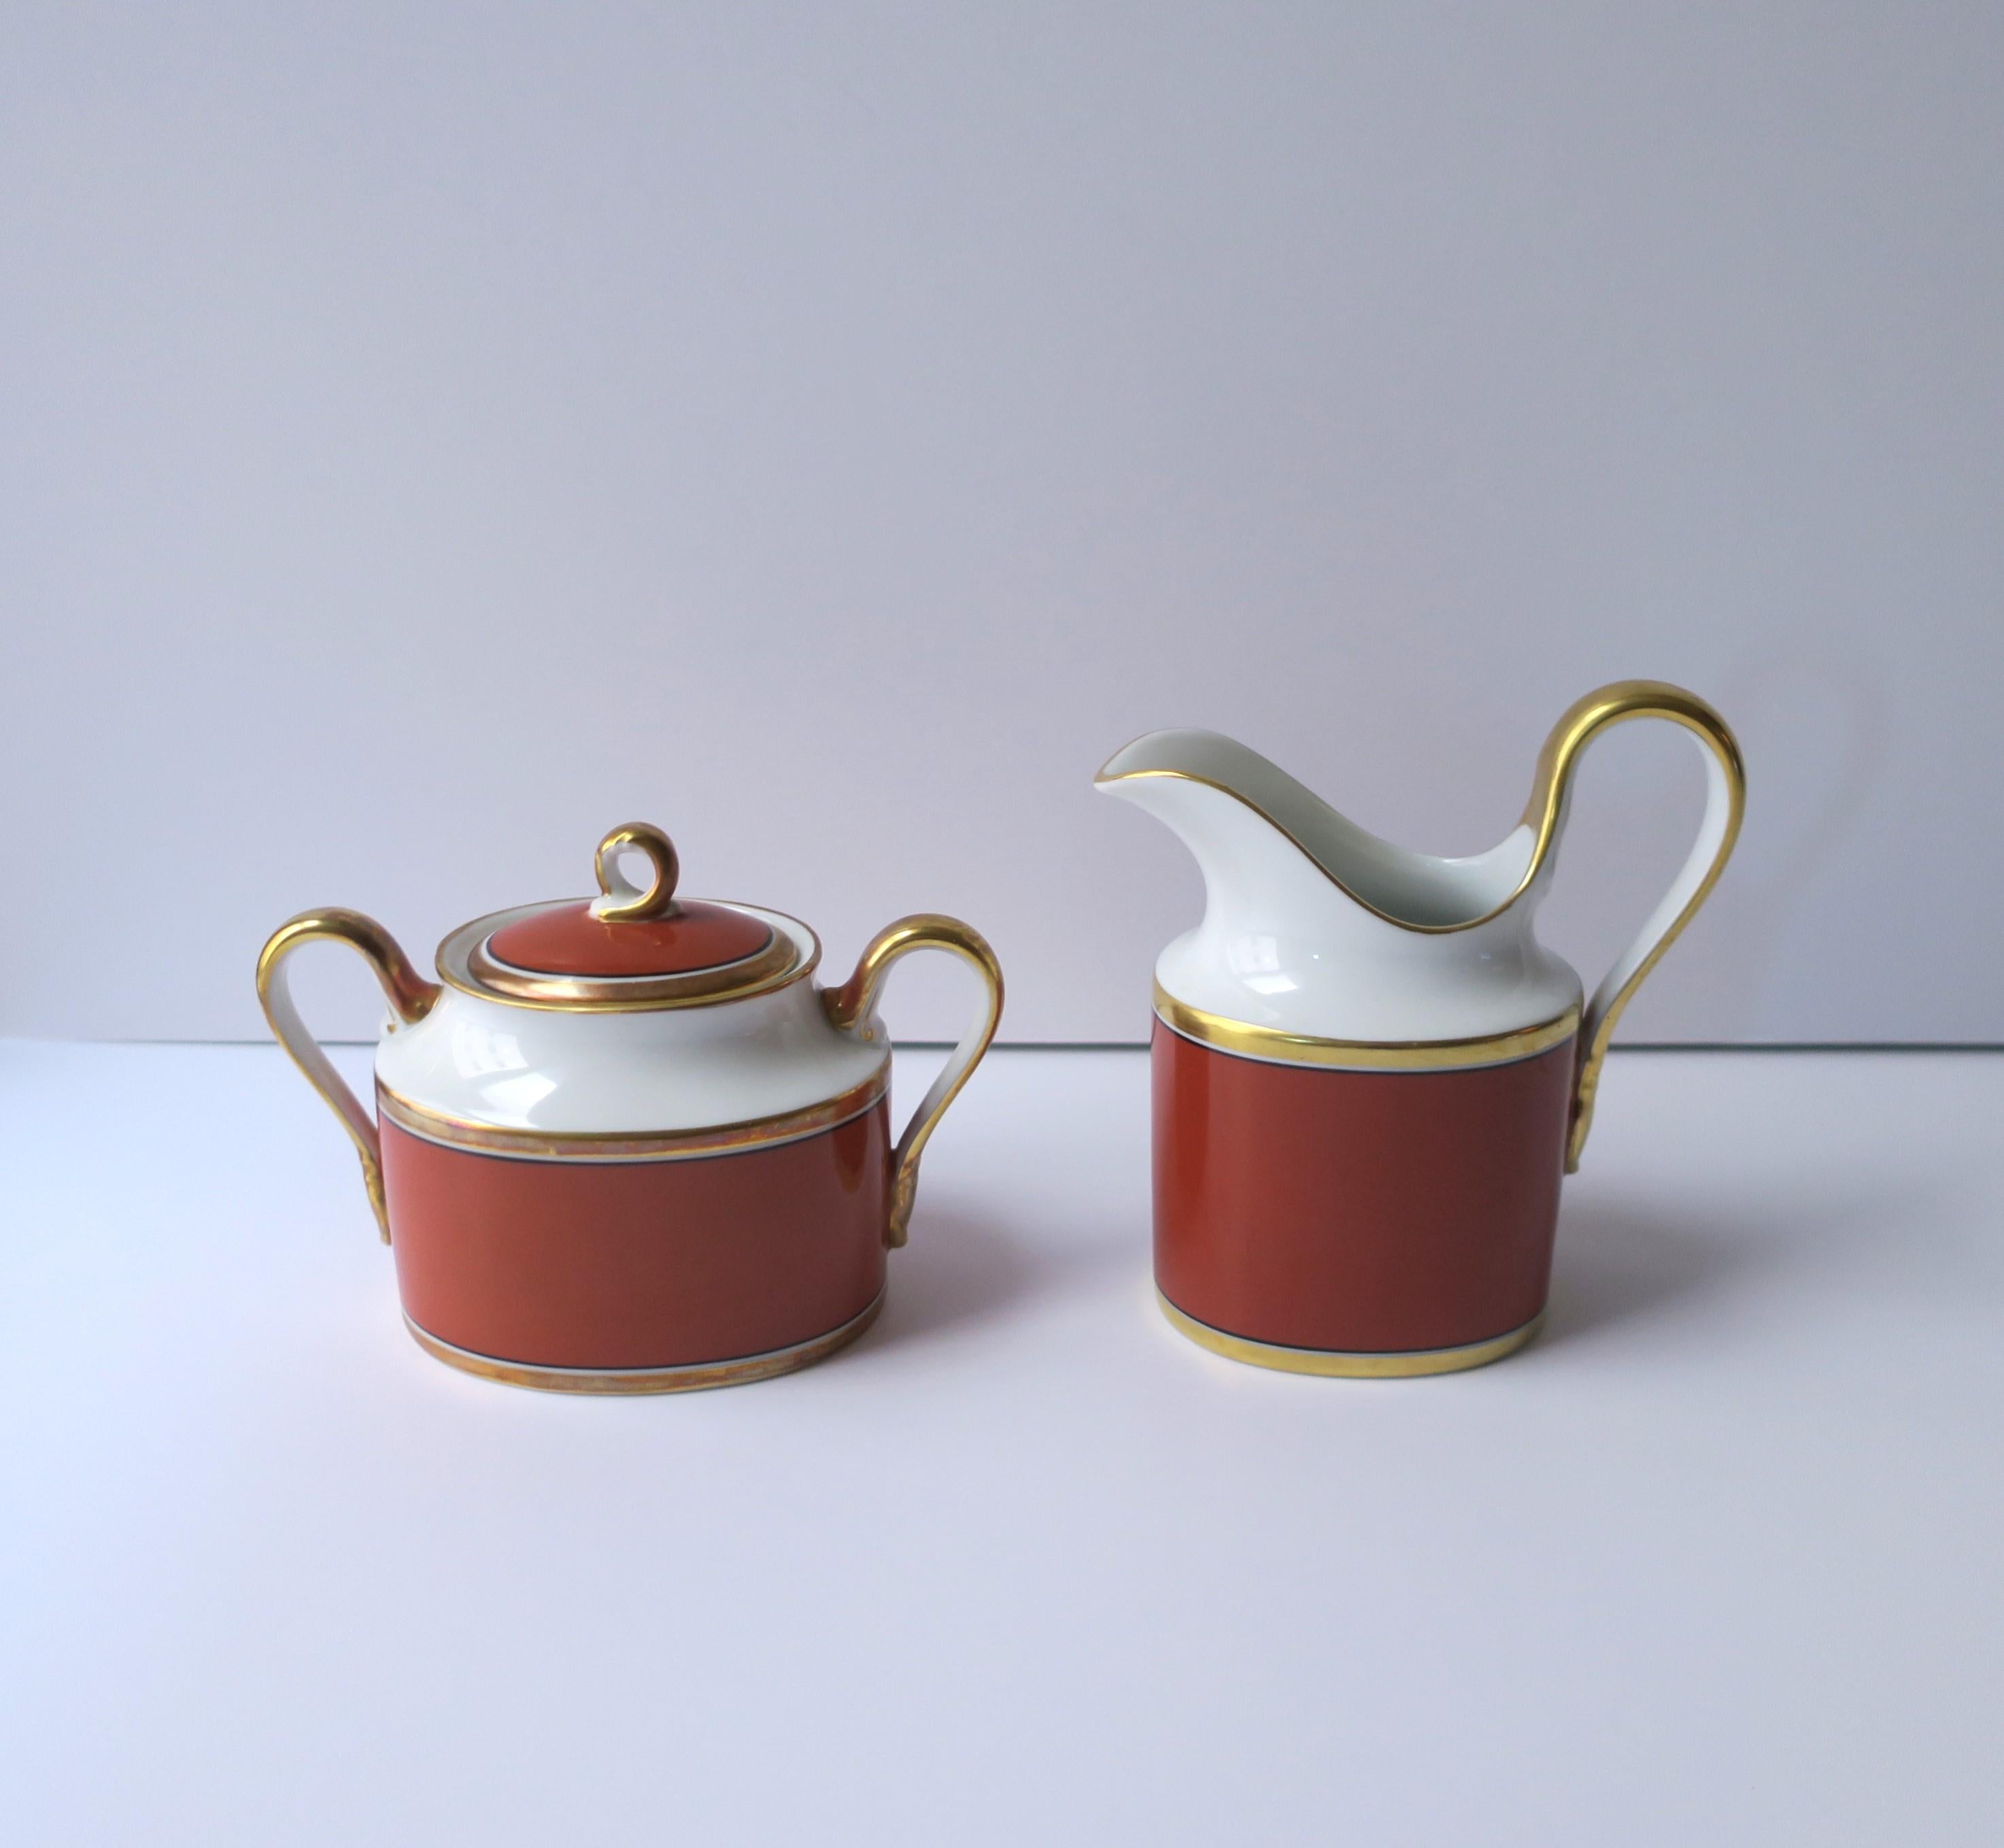 Italian Richard Ginori Contessa Porcelain Sugar Bowl and Lid In Good Condition For Sale In New York, NY